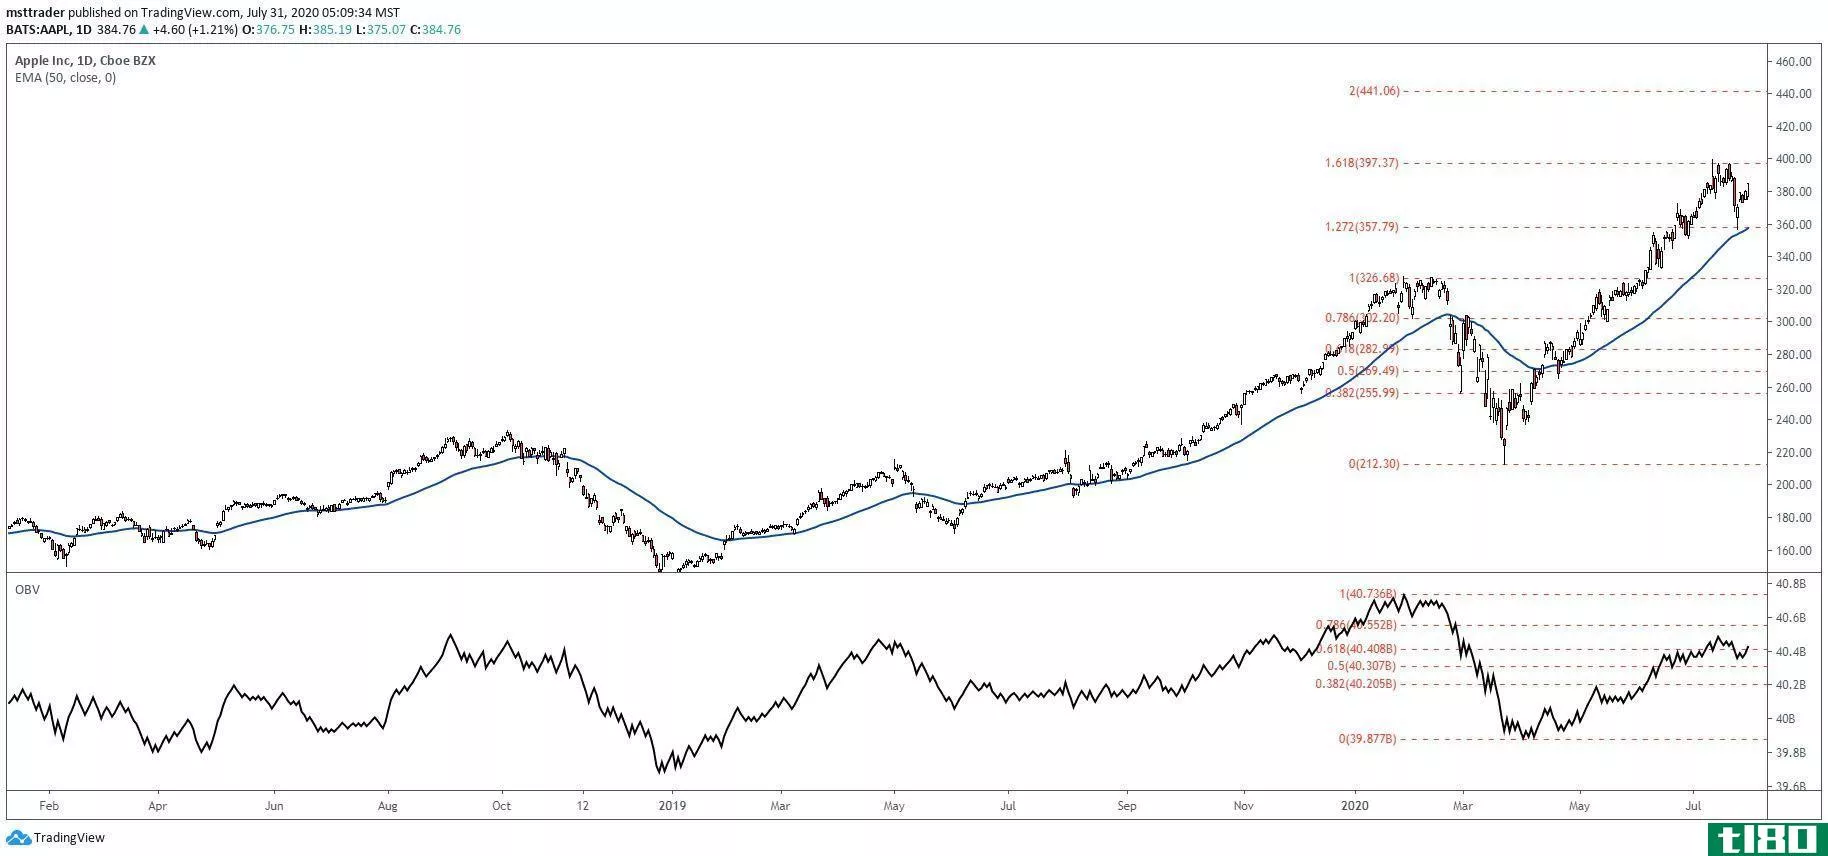 Short-term chart showing the share price performance of Apple Inc. (AAPL)